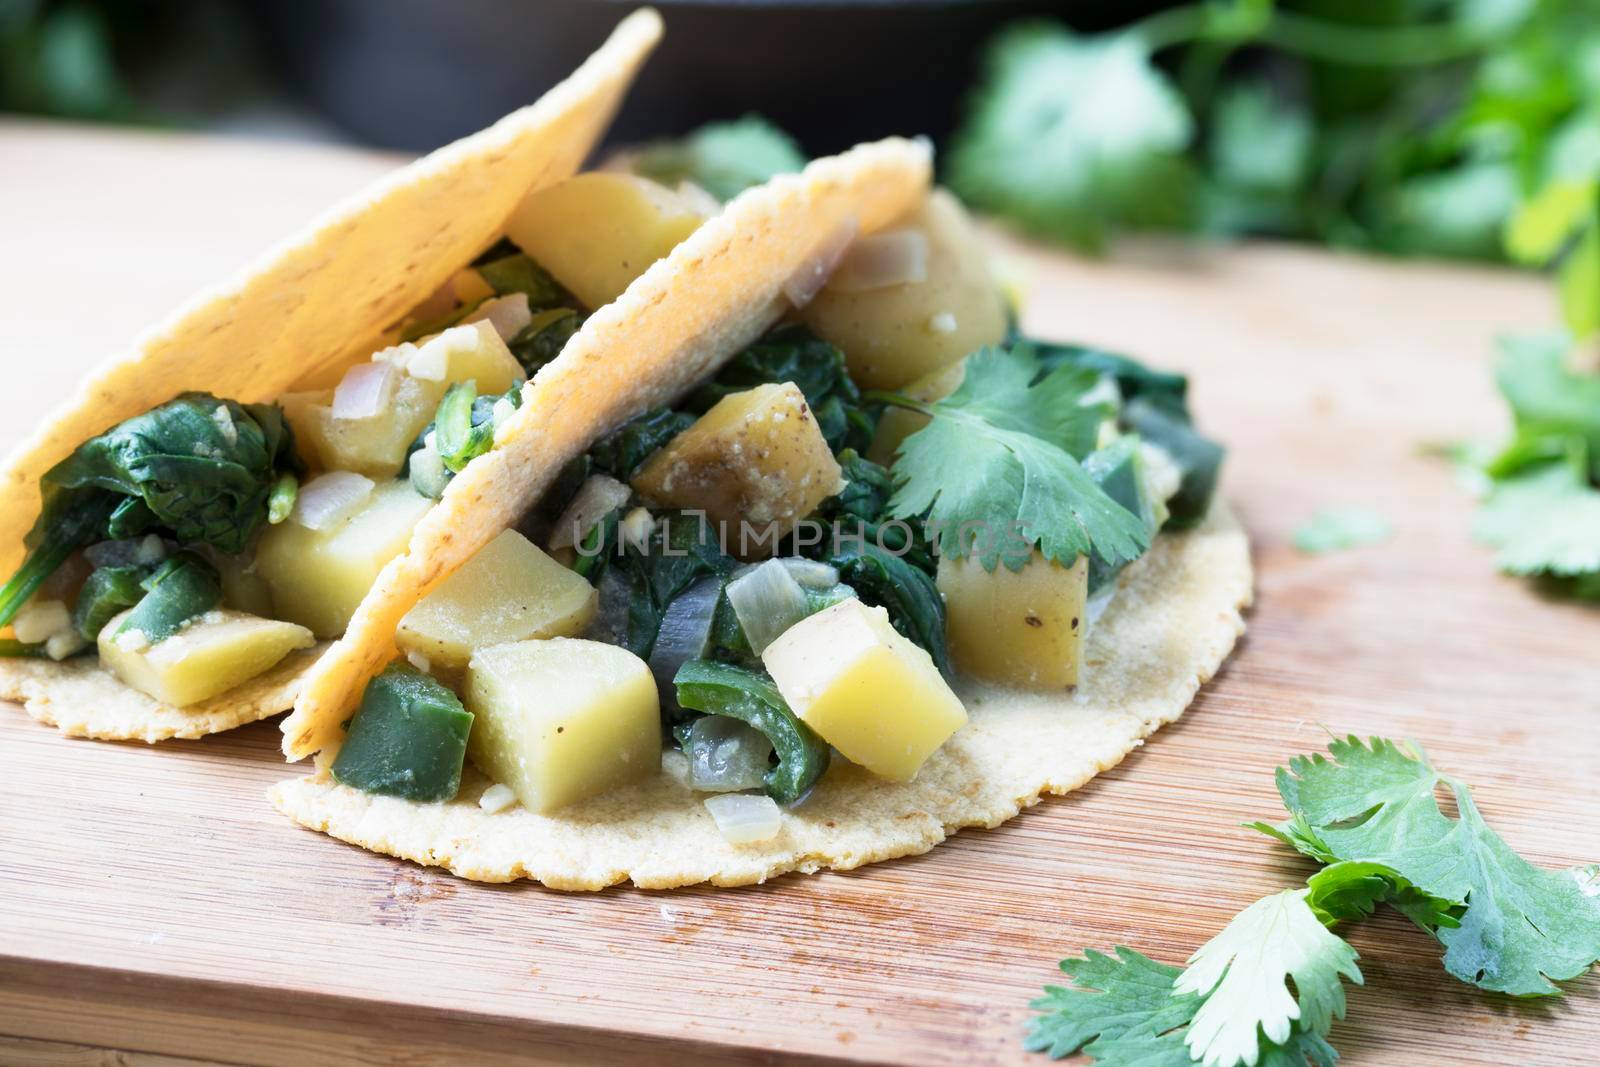 Two vegan soft tacos filled with potatoes and spinach and topped with cilantro.